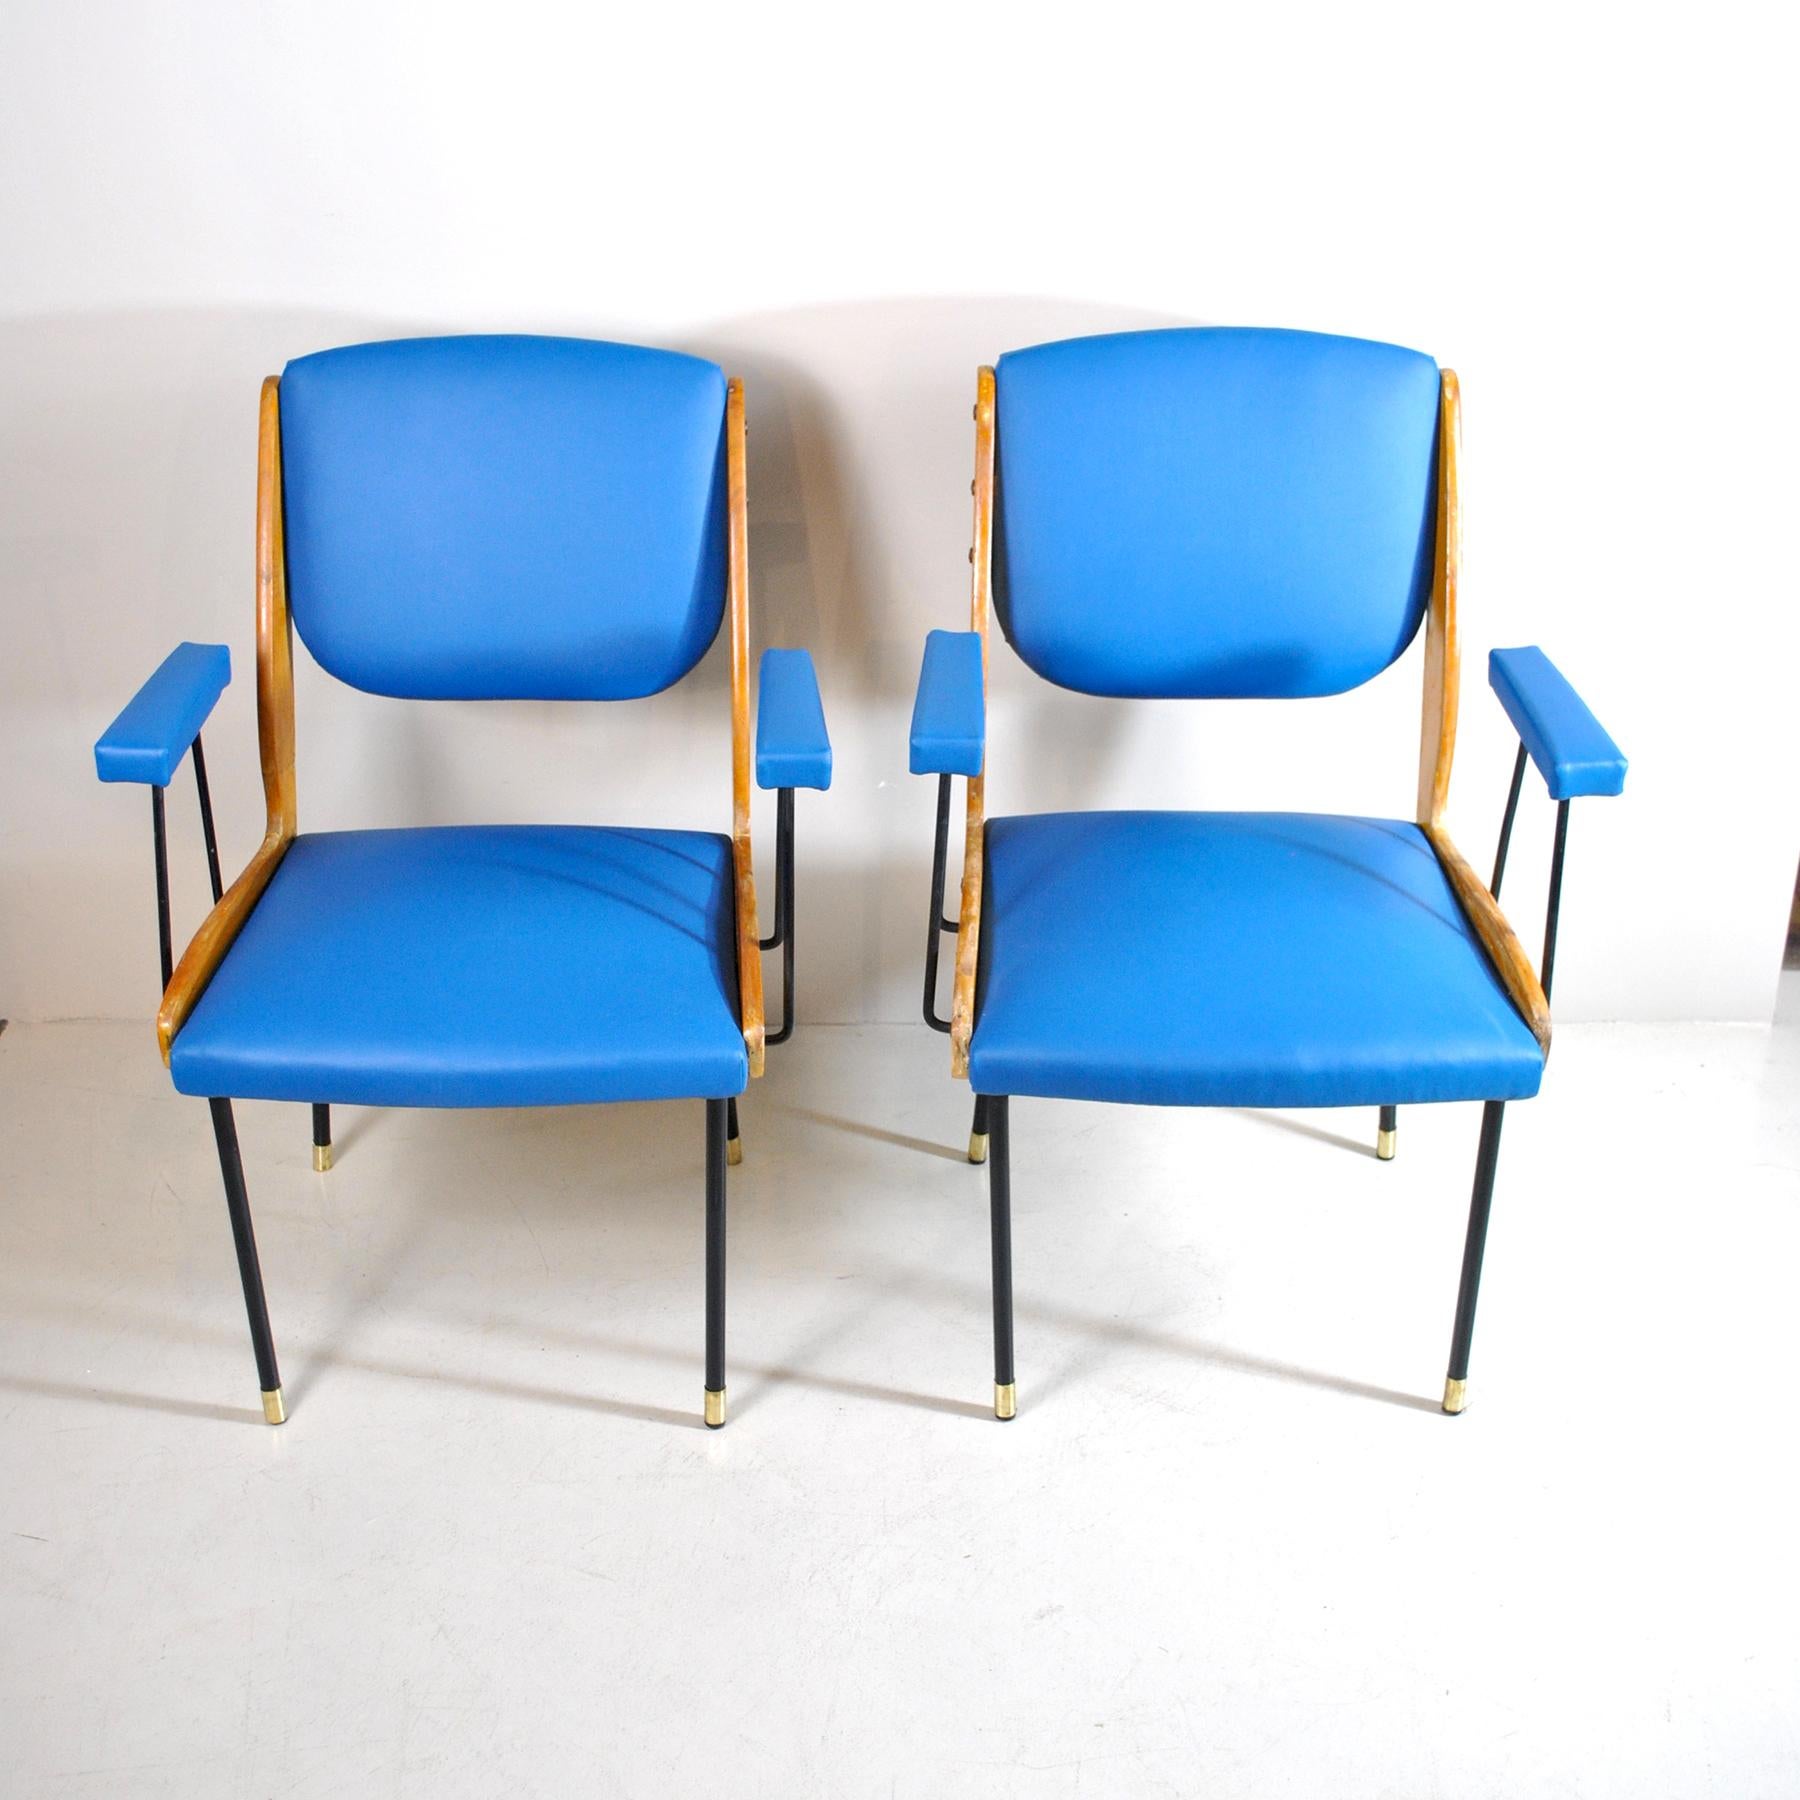 Italian midcentury set of two chairs with armrests from late 1950s.